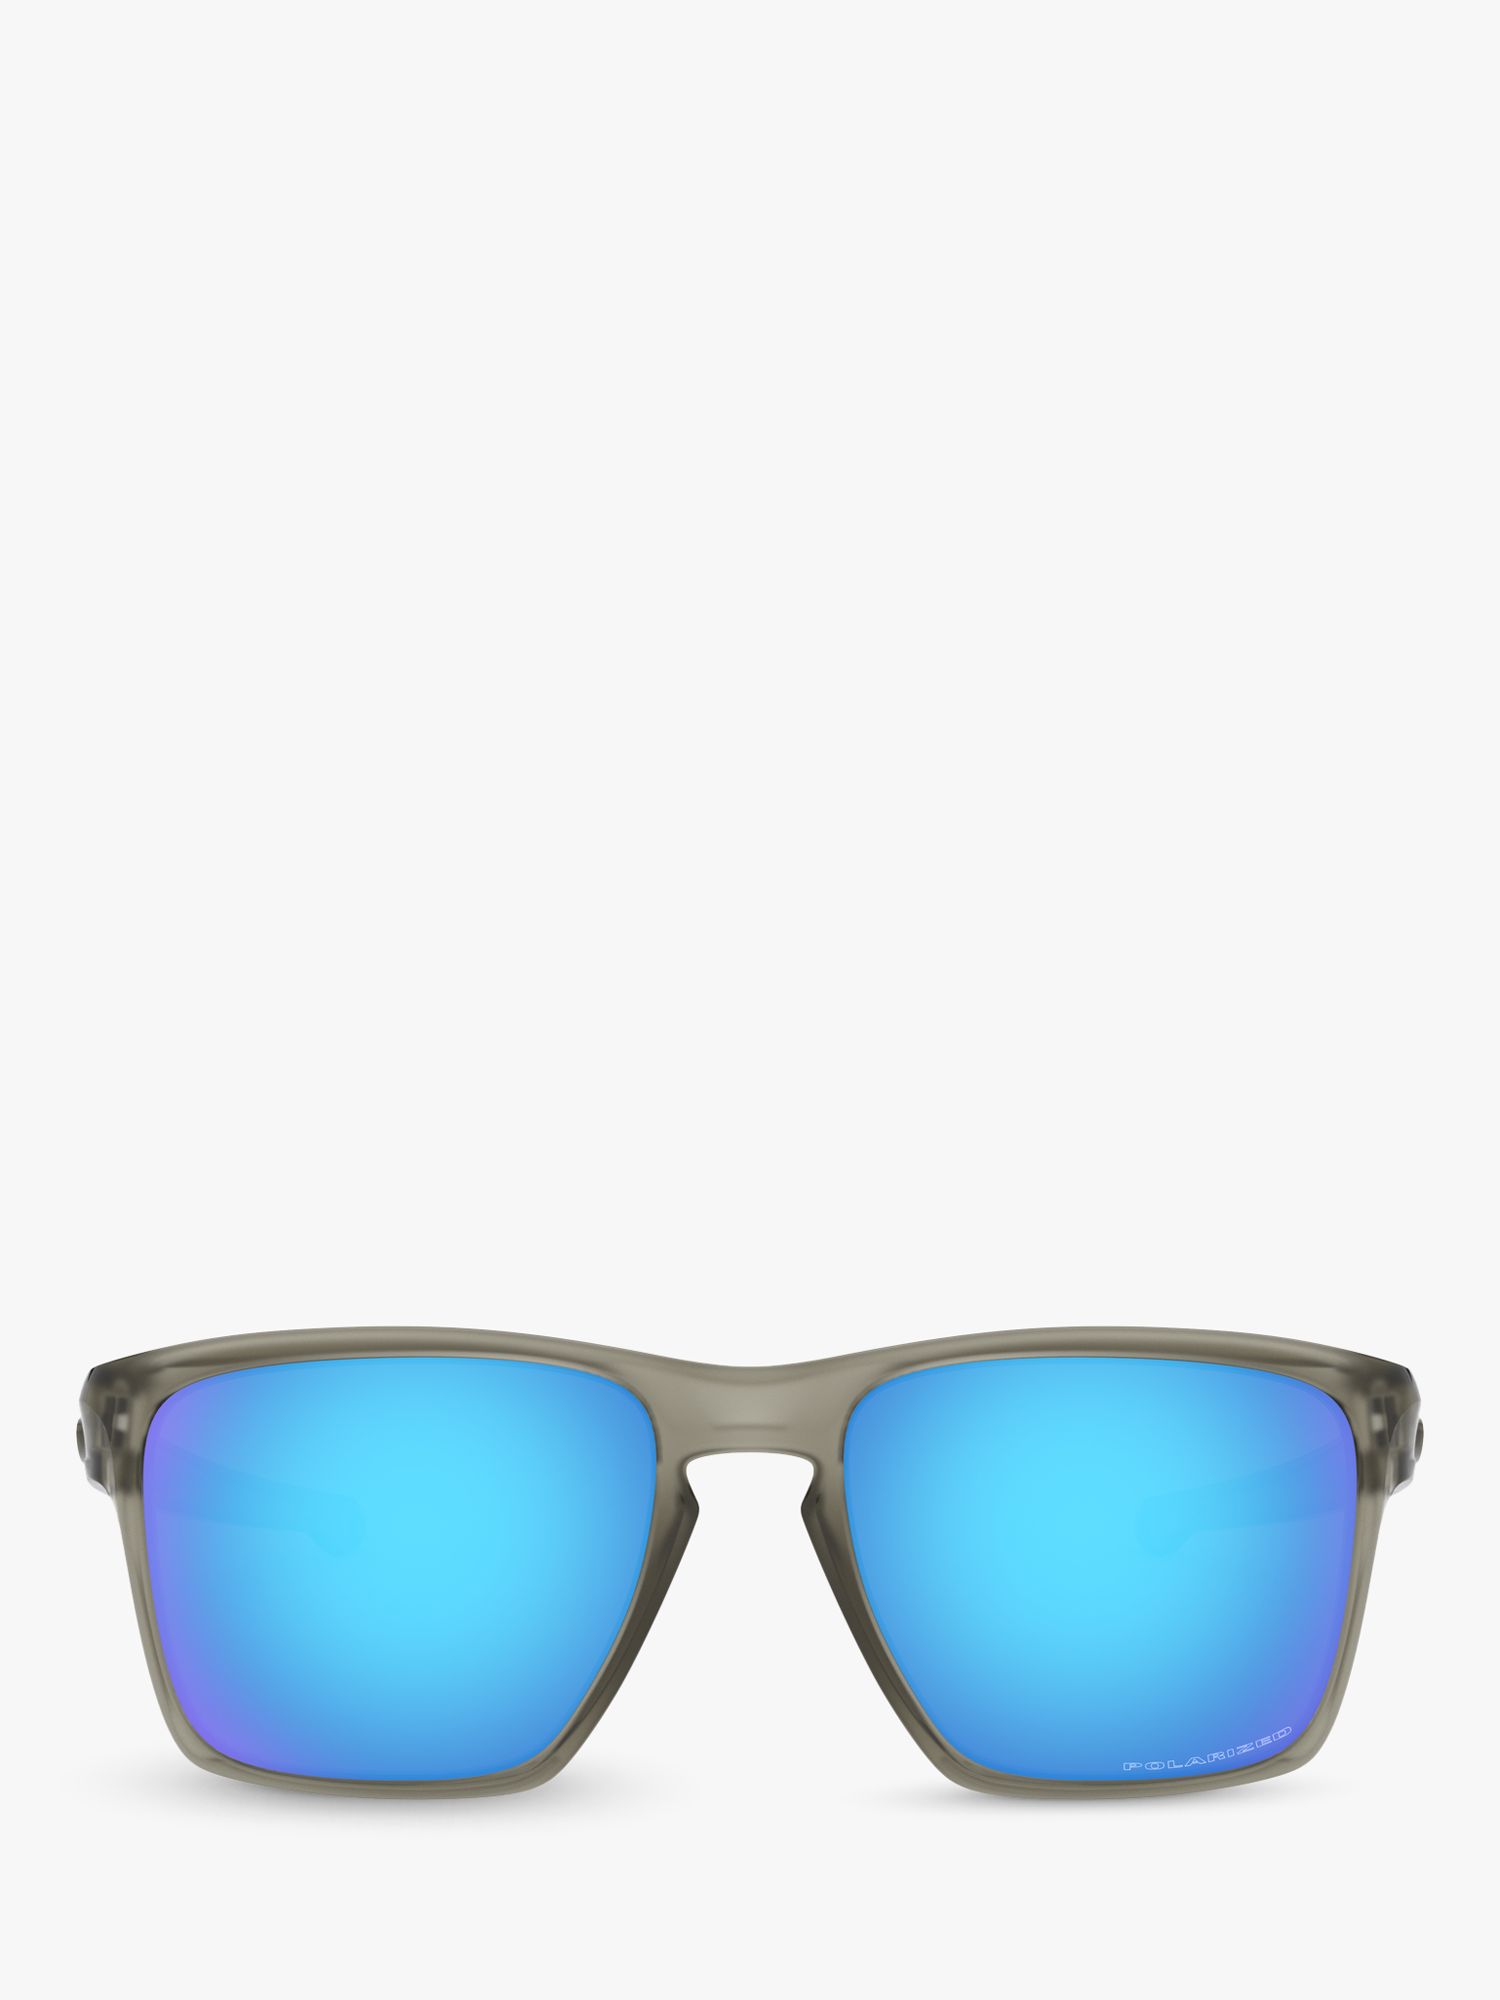 Oakley OO9341 Sliver XL Polarised Square Sunglasses, Grey/Blue at John  Lewis & Partners